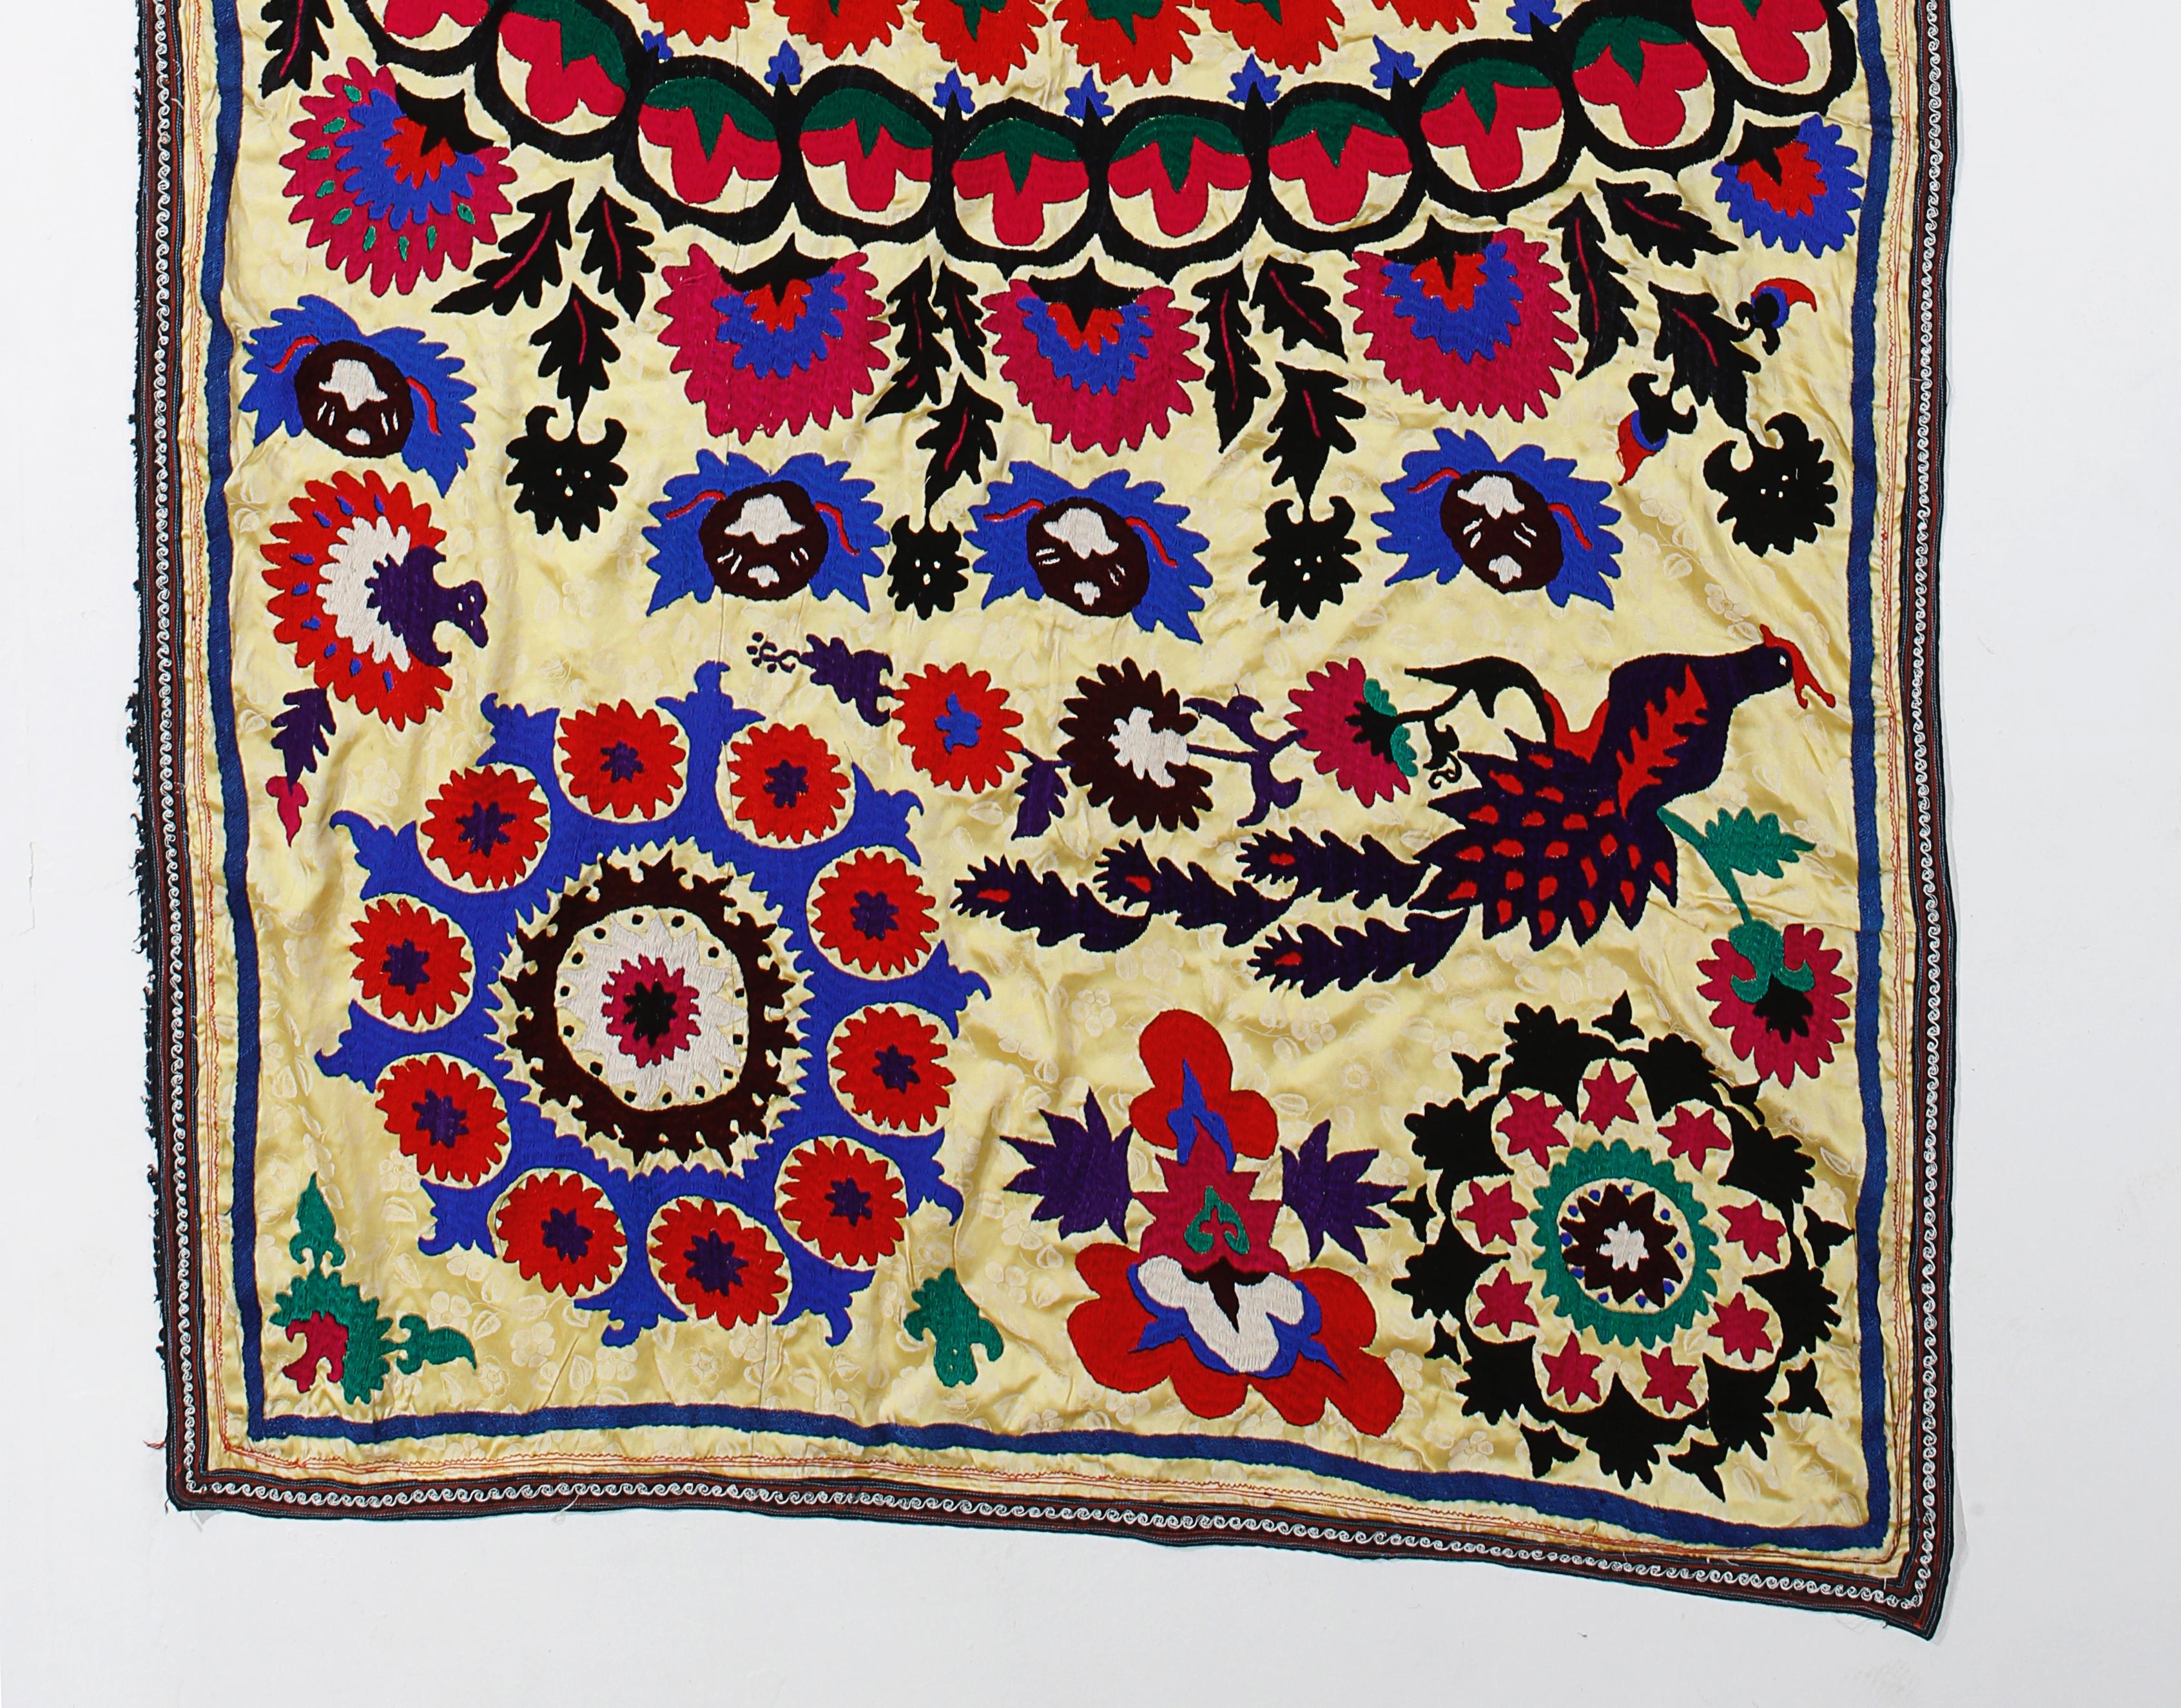 4.5x12 Ft Colorful Vintage Silk Embroidery Wall Hanging, Uzbek Suzani Tablecloth In Good Condition For Sale In Philadelphia, PA